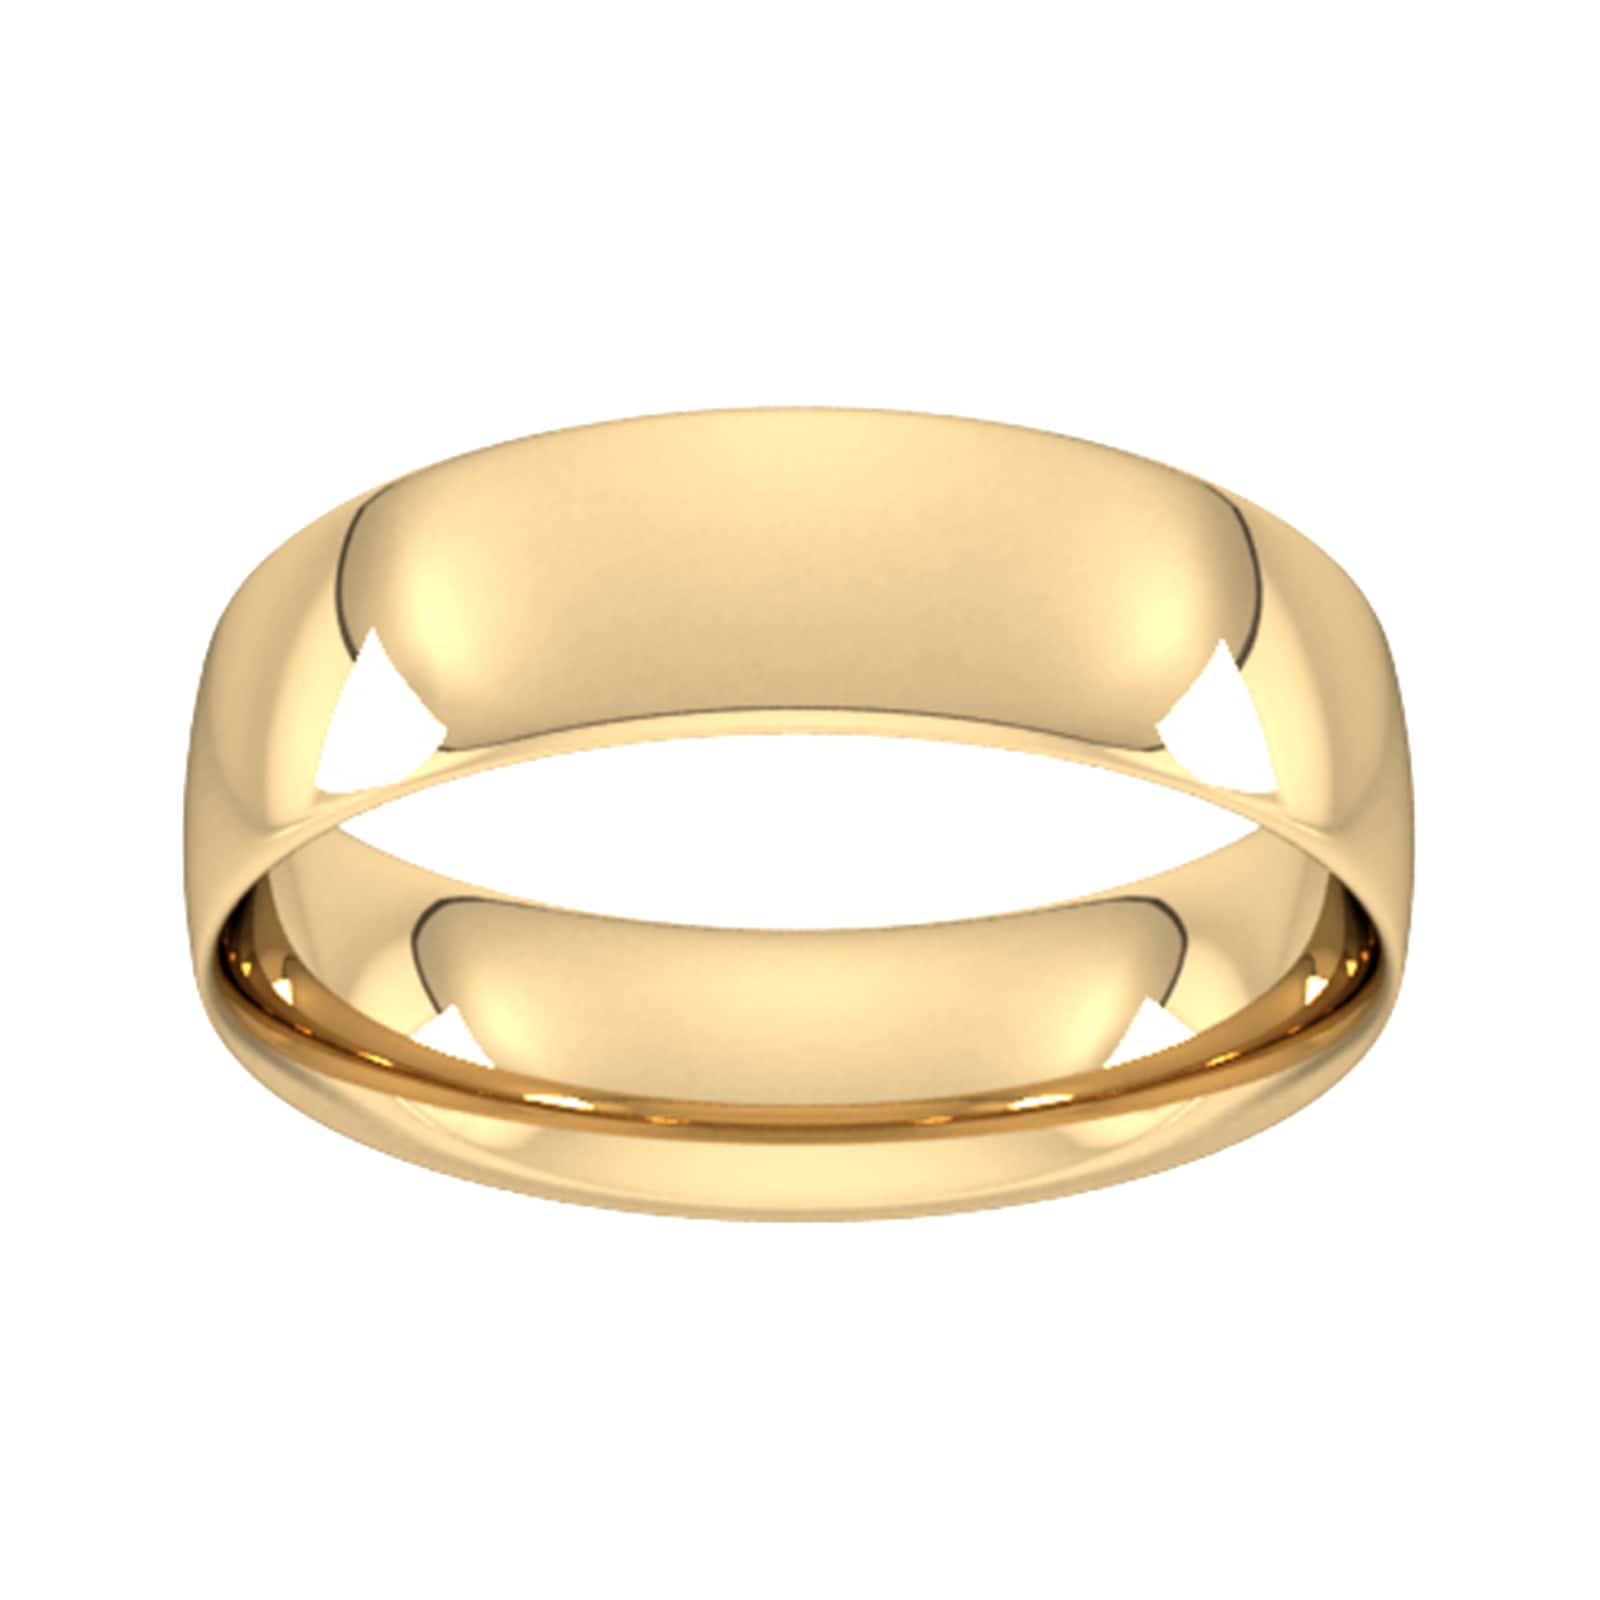 6mm Traditional Court Standard Wedding Ring In 18 Carat Yellow Gold - Ring Size G